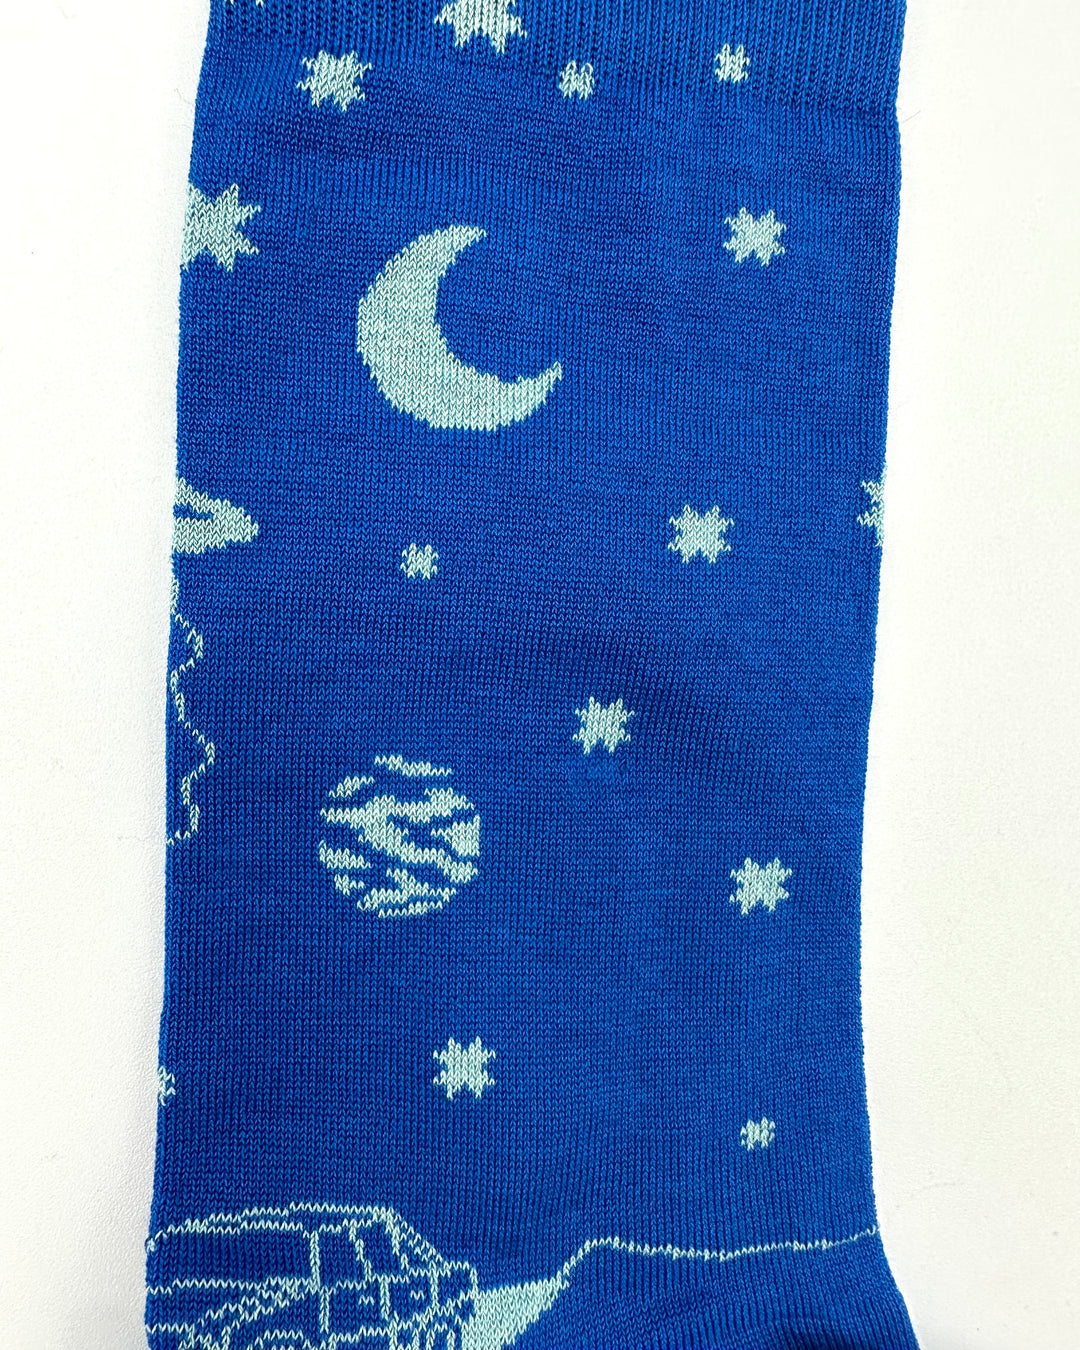 Blue Night Time Desert Socks - Mens Size 6 1/2 - 9 And Size 9 1/2 - 12